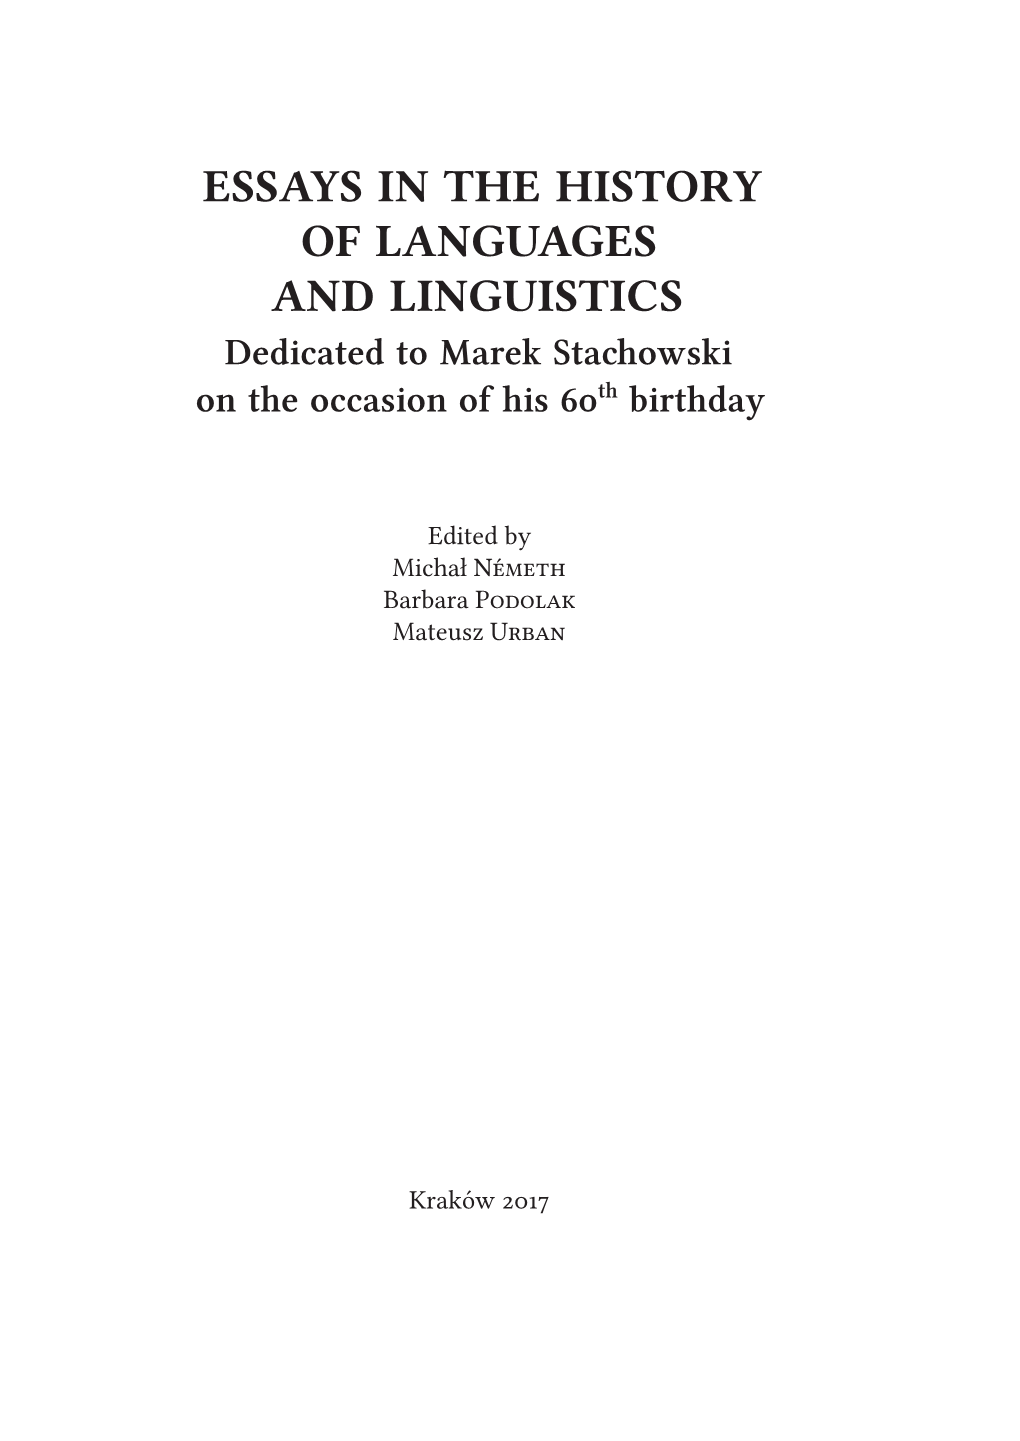 ESSAYS in the HISTORY of LANGUAGES and LINGUISTICS Dedicated to Marek Stachowski on the Occasion of His 60Th Birthday